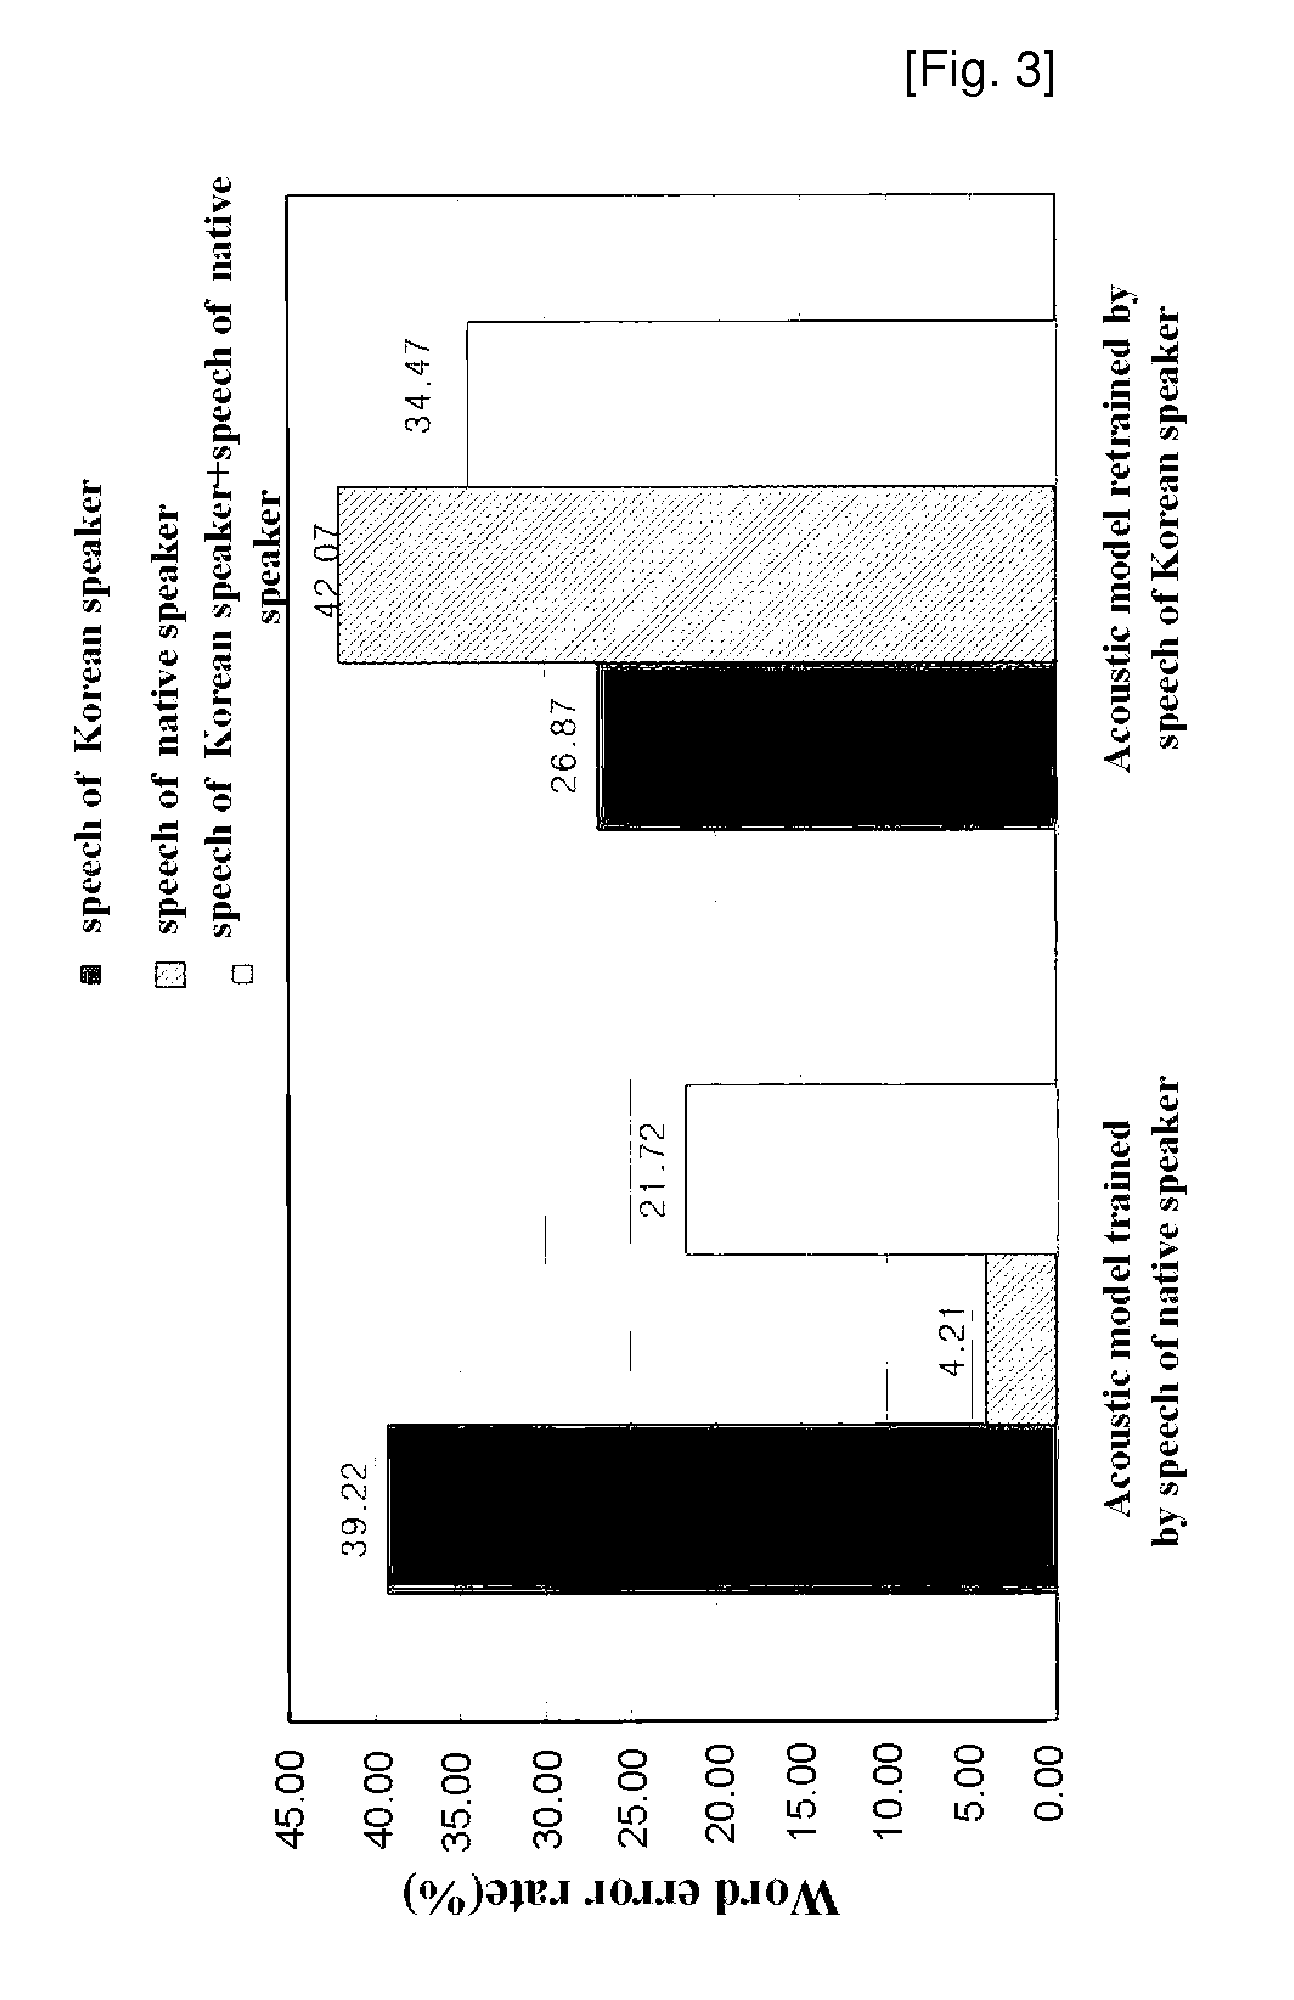 Acoustic Model Adaptation Methods Based on Pronunciation Variability Analysis for Enhancing the Recognition of Voice of Non-Native Speaker and Apparatus Thereof